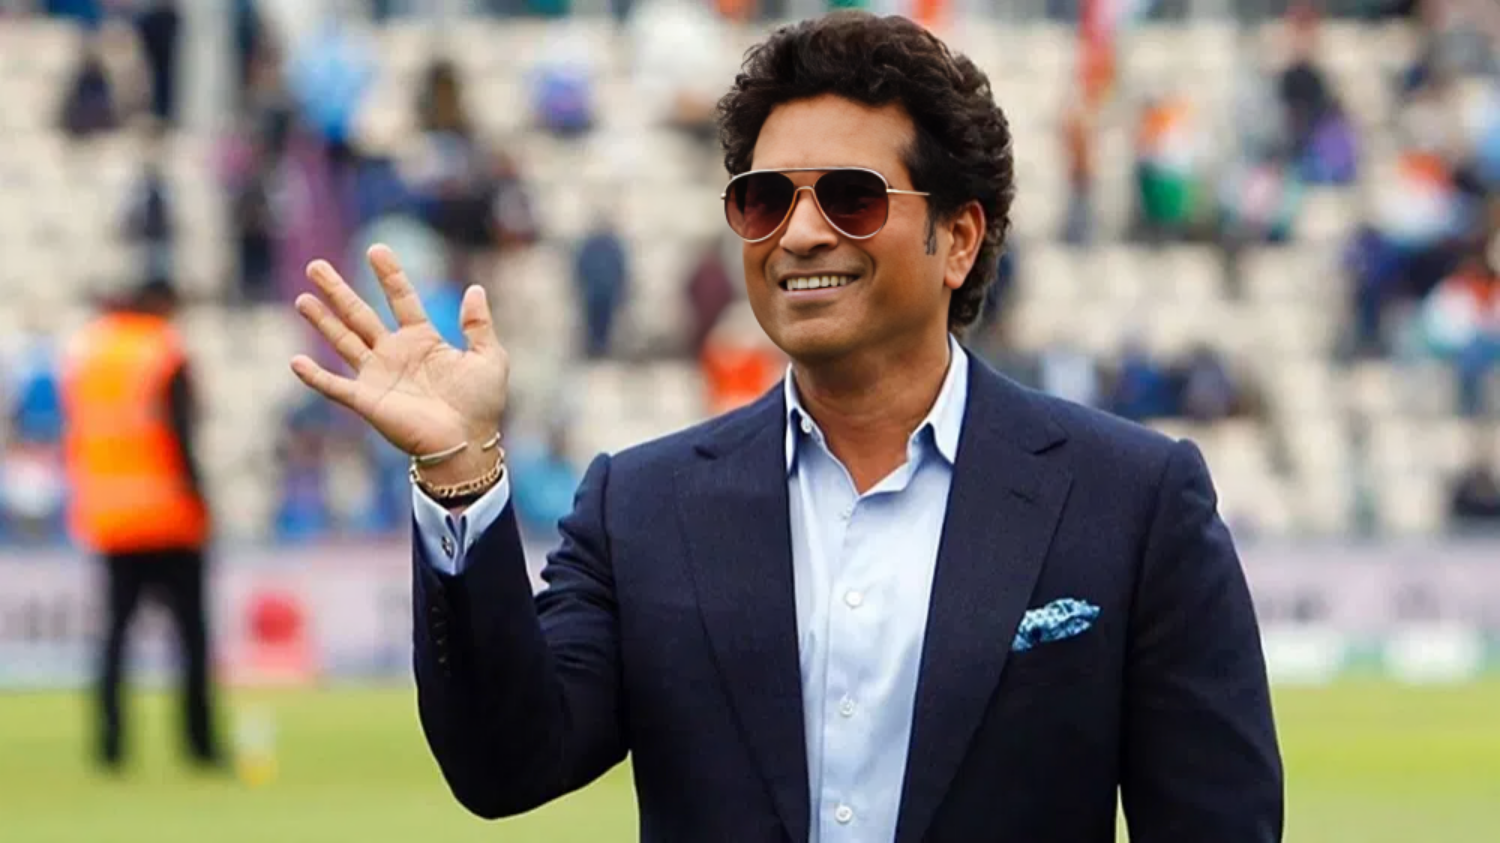 Picture of This defense share can reach over 1400, the company made a big deal, Sachin Tendulkar has 4.5 lakh shares